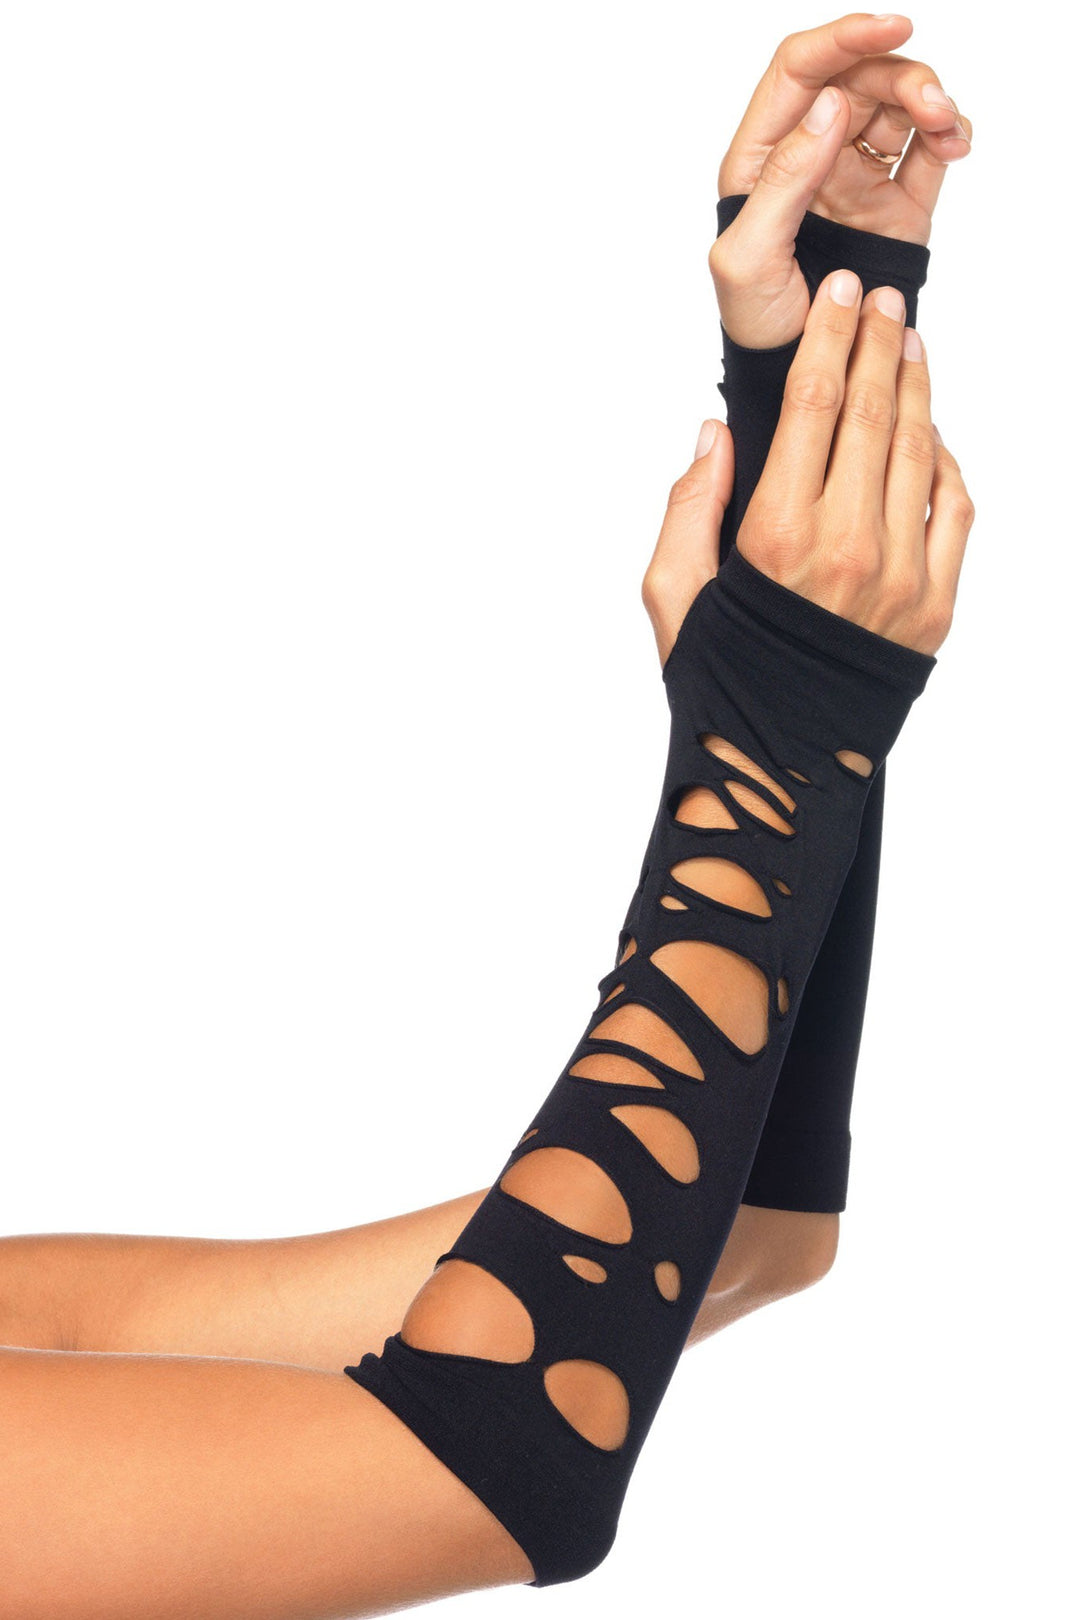 Distressed Arm Warmers